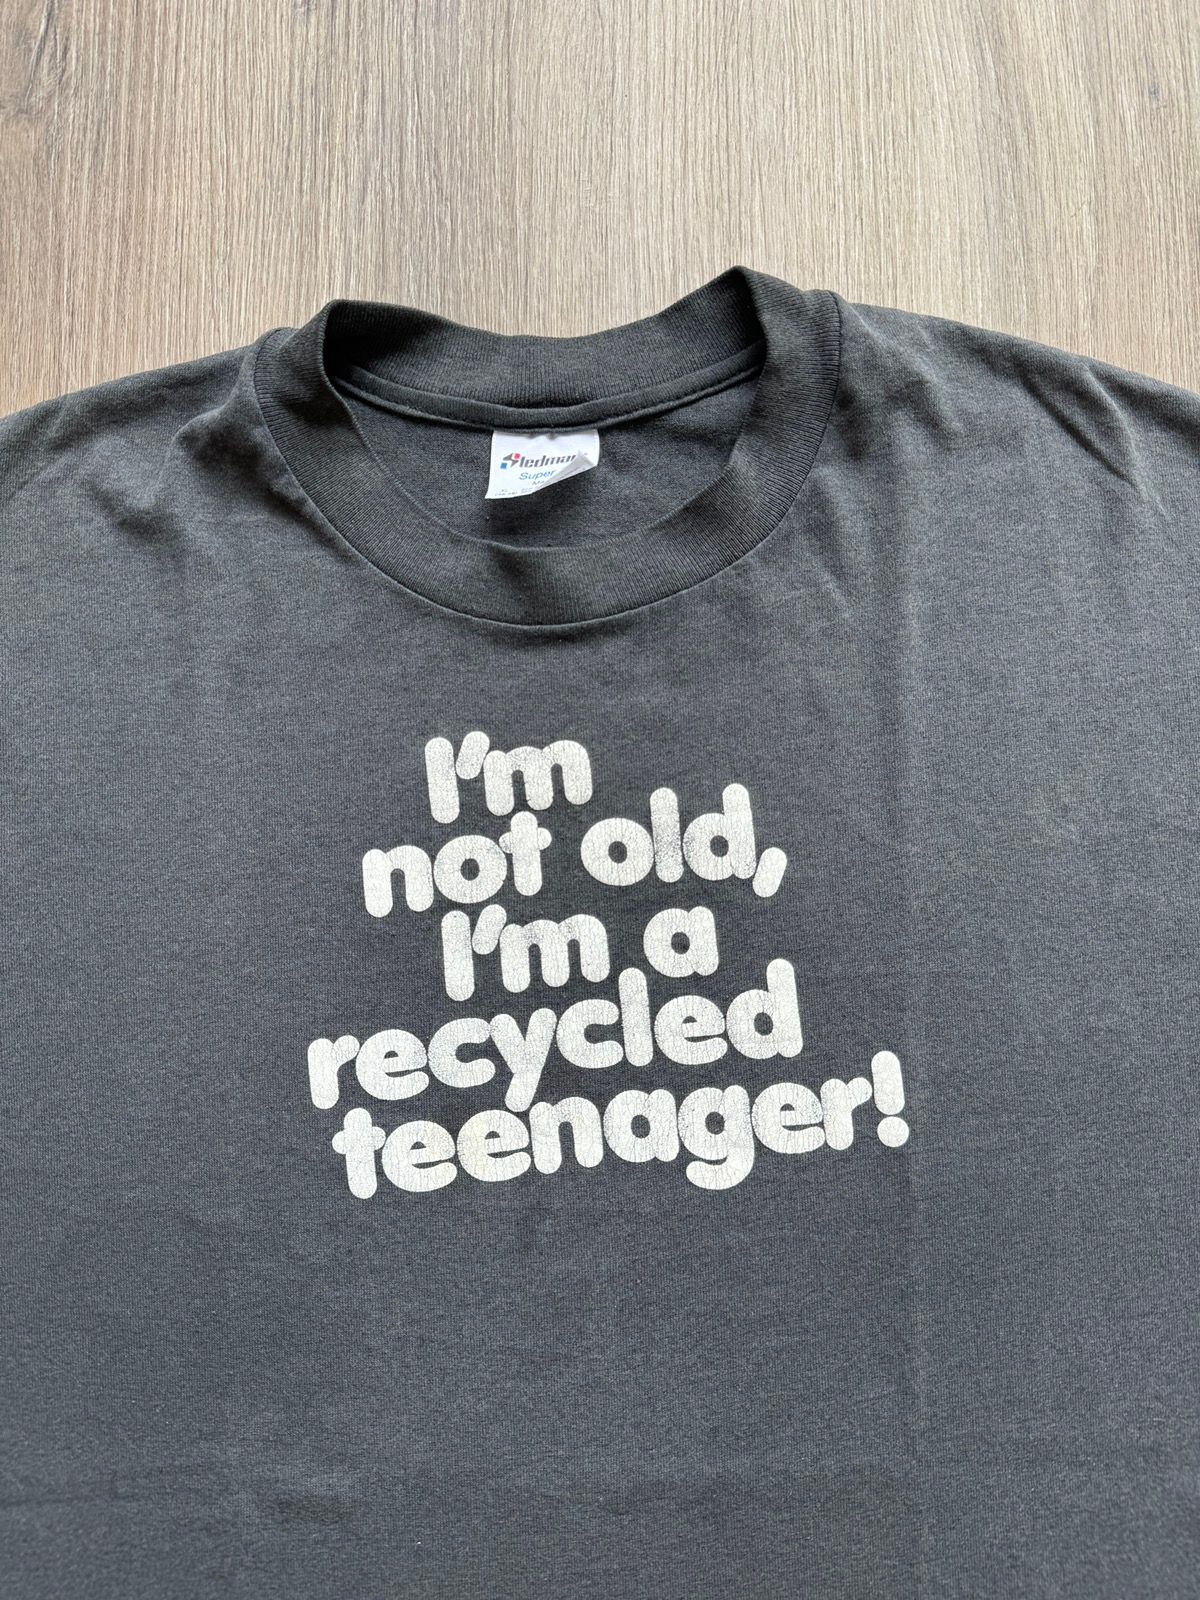 Vintage Vintage 90s I’m not old, I’m a Recycled Teenager! Statement Size US XL / EU 56 / 4 - 3 Thumbnail